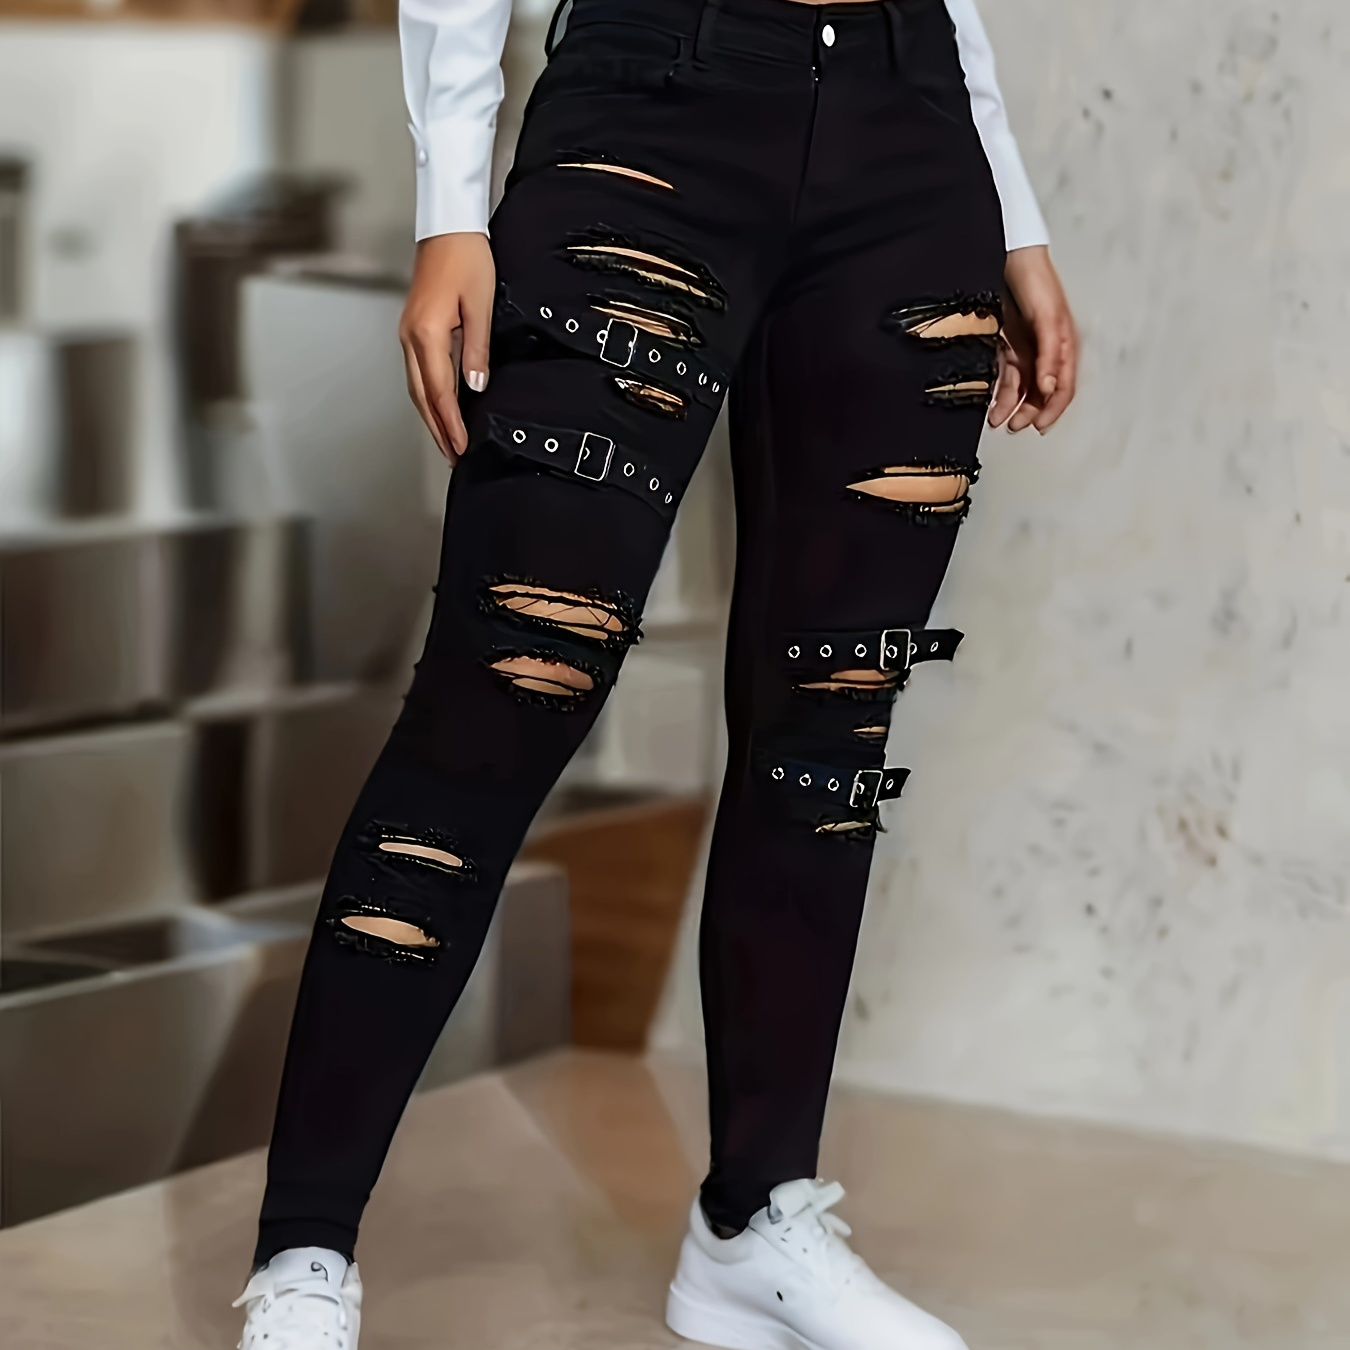 

Women's Casual Ripped Black Color Denim Skinny Jeans With Garter Buckle Detail, Stretchy Fit, All-match Streetwear Long Pants